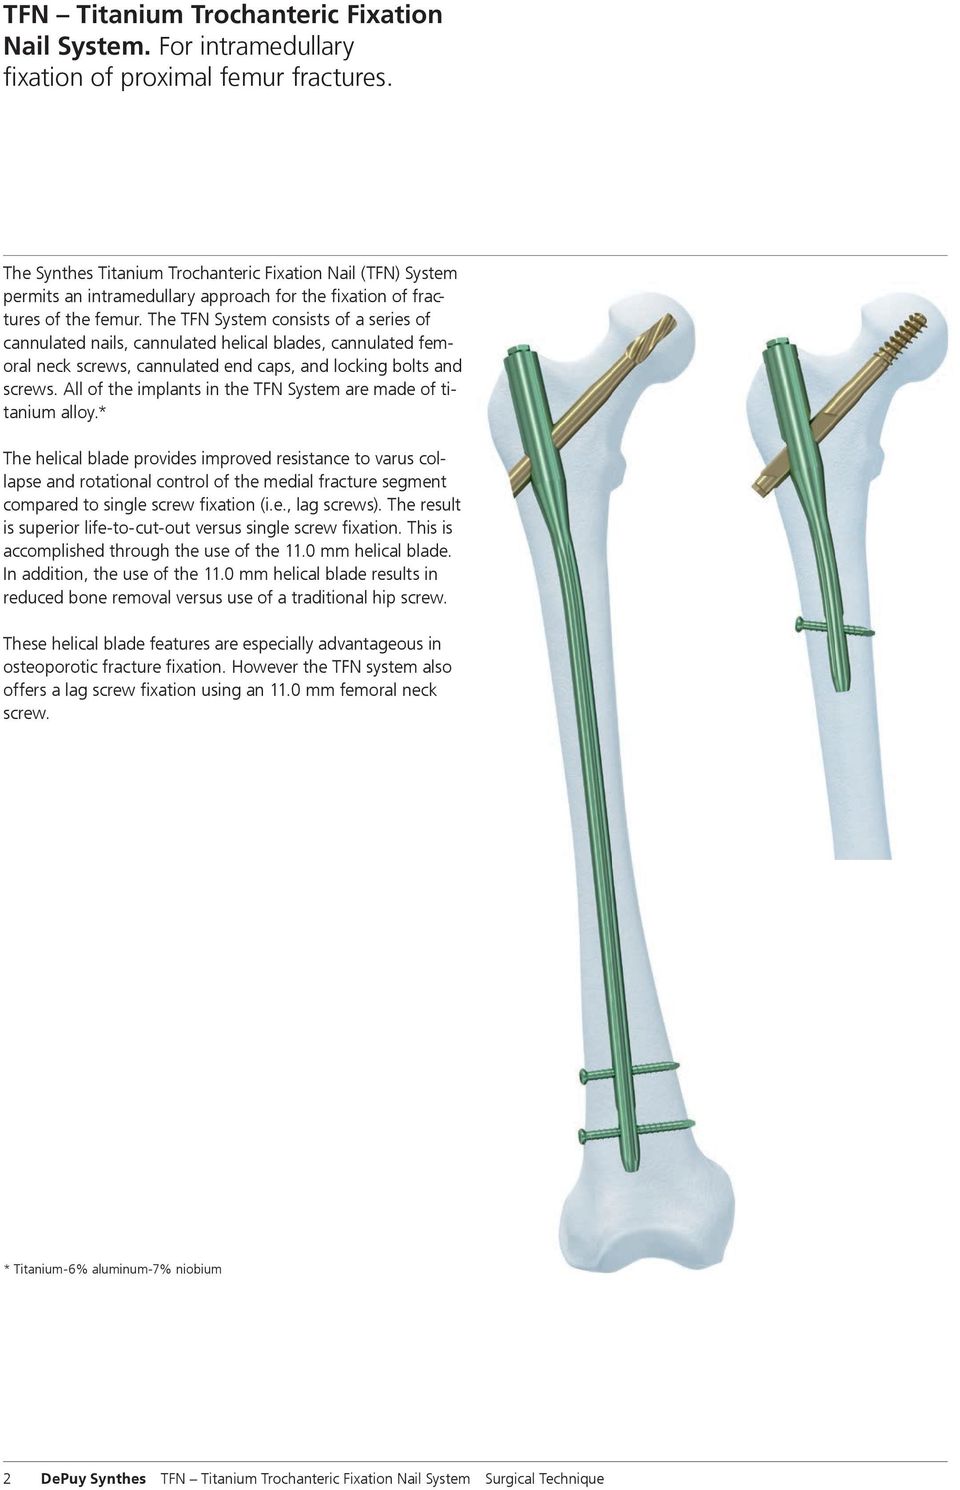 The TFN System consists of a series of cannulated nails, cannulated helical blades, cannulated femoral neck screws, cannulated end caps, and locking bolts and screws.